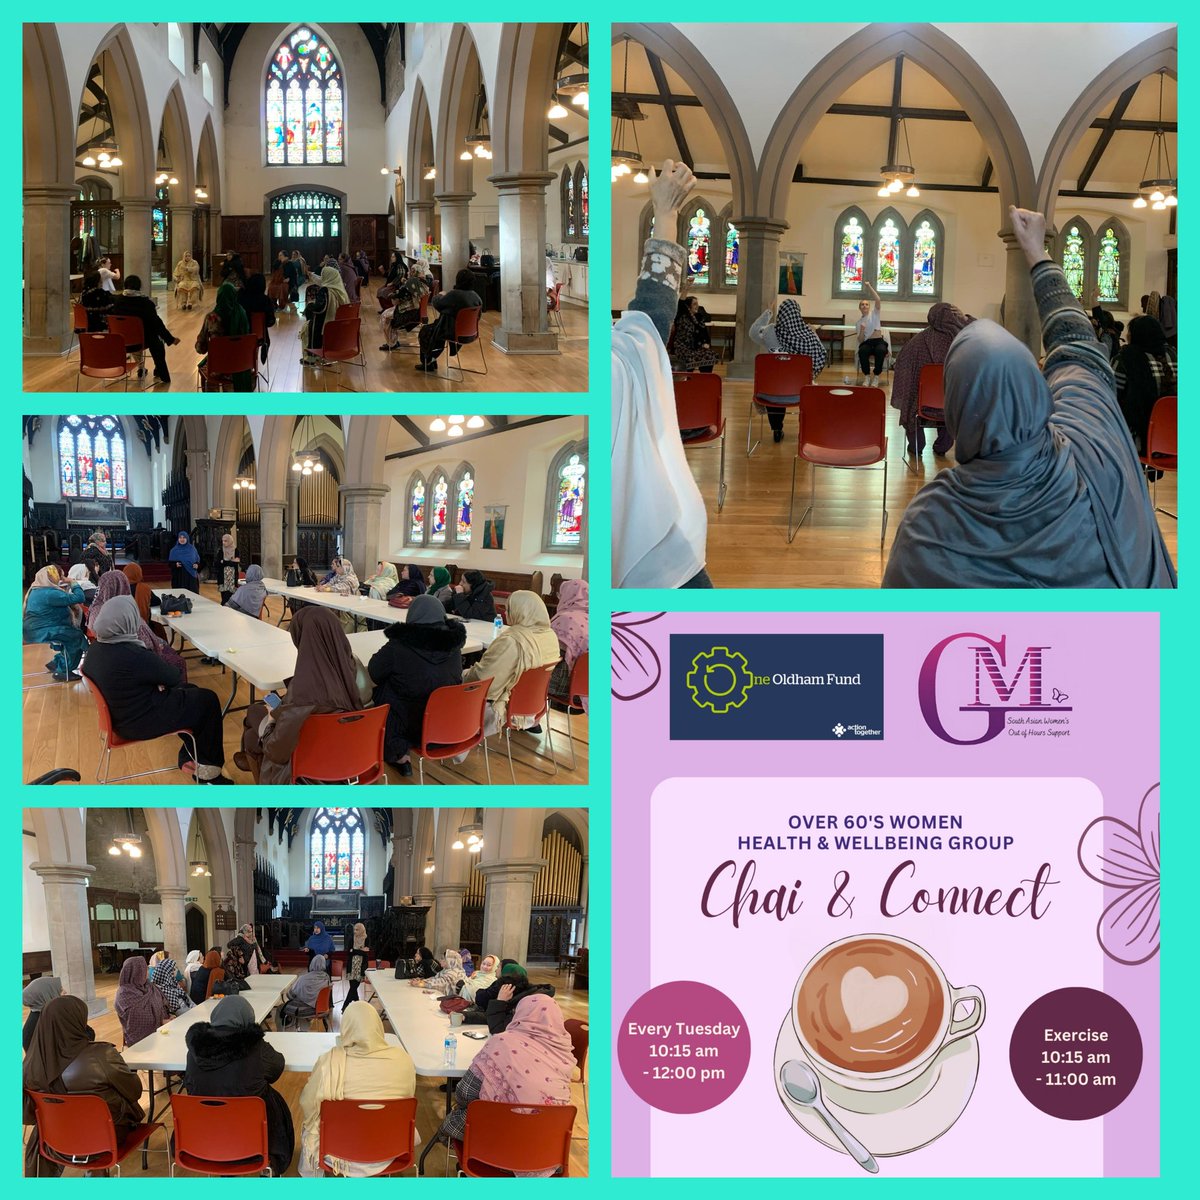 A fantastic session with our over 60s group, chairbased exercise to kick start Tuesday morning after Ramadan followed by an inspiration speaker #empowering #women to #vote @BameConnect @HWOldham @OldhamCouncil @OfficialOACT @WeActTogether